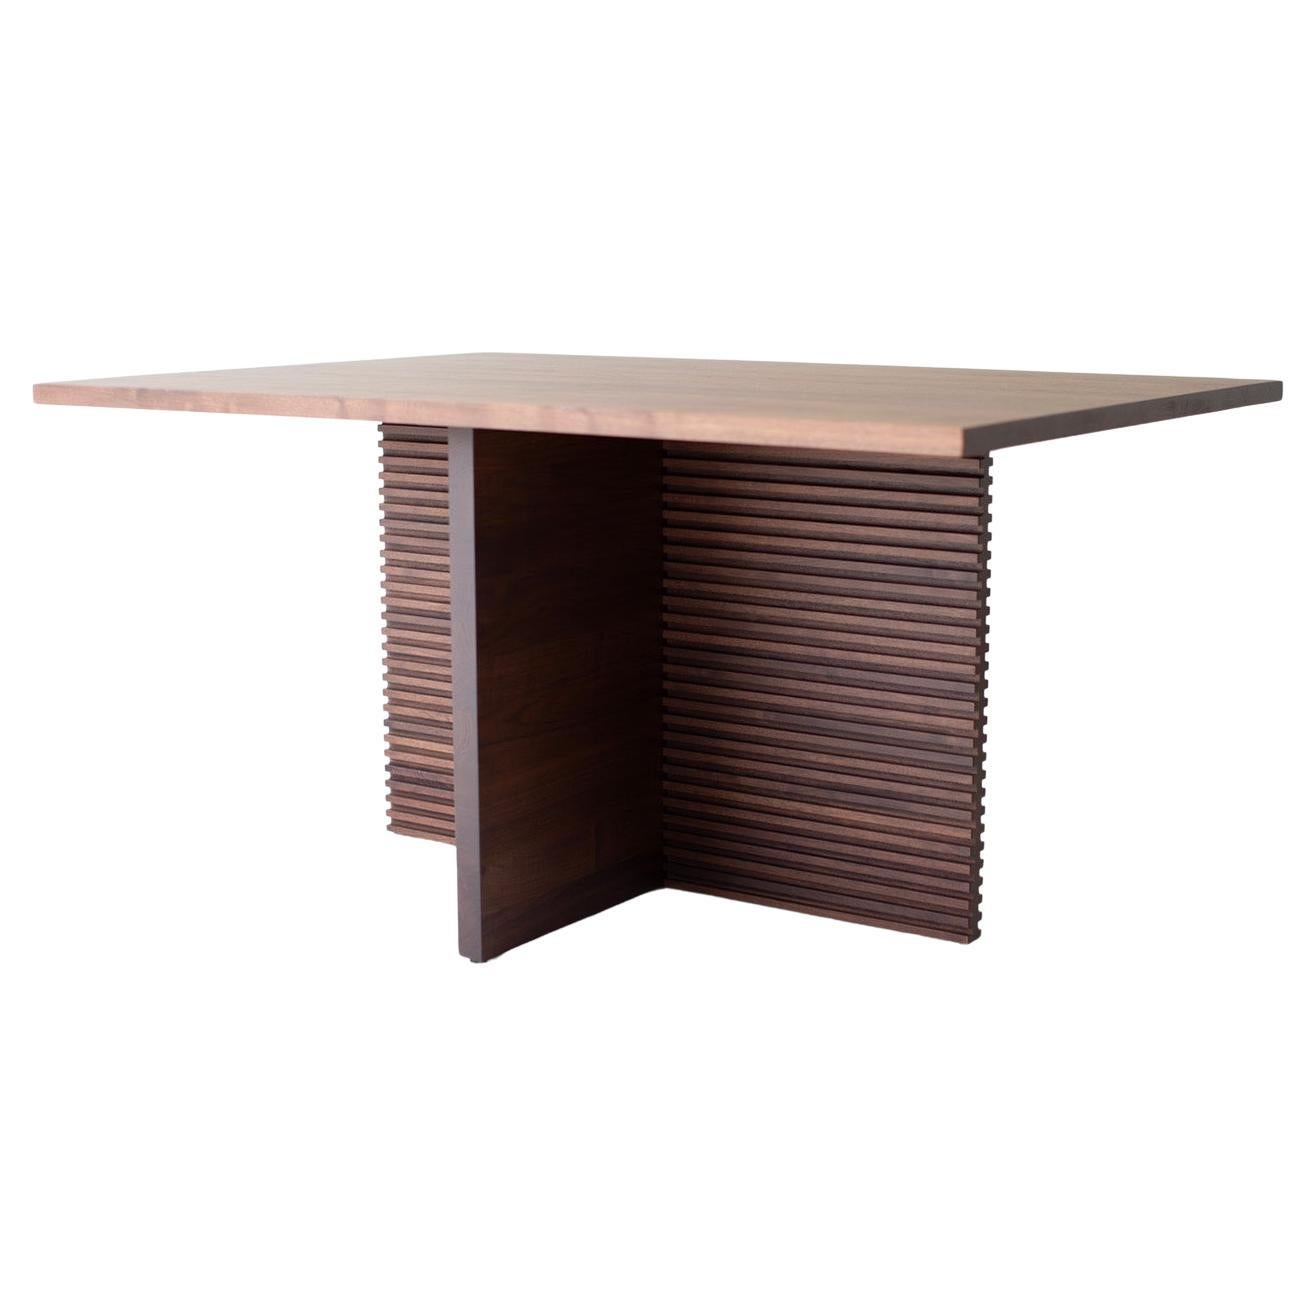 Bertu Dining Table, Pedestal Dining Table, Walnut Dining Table, Cicely